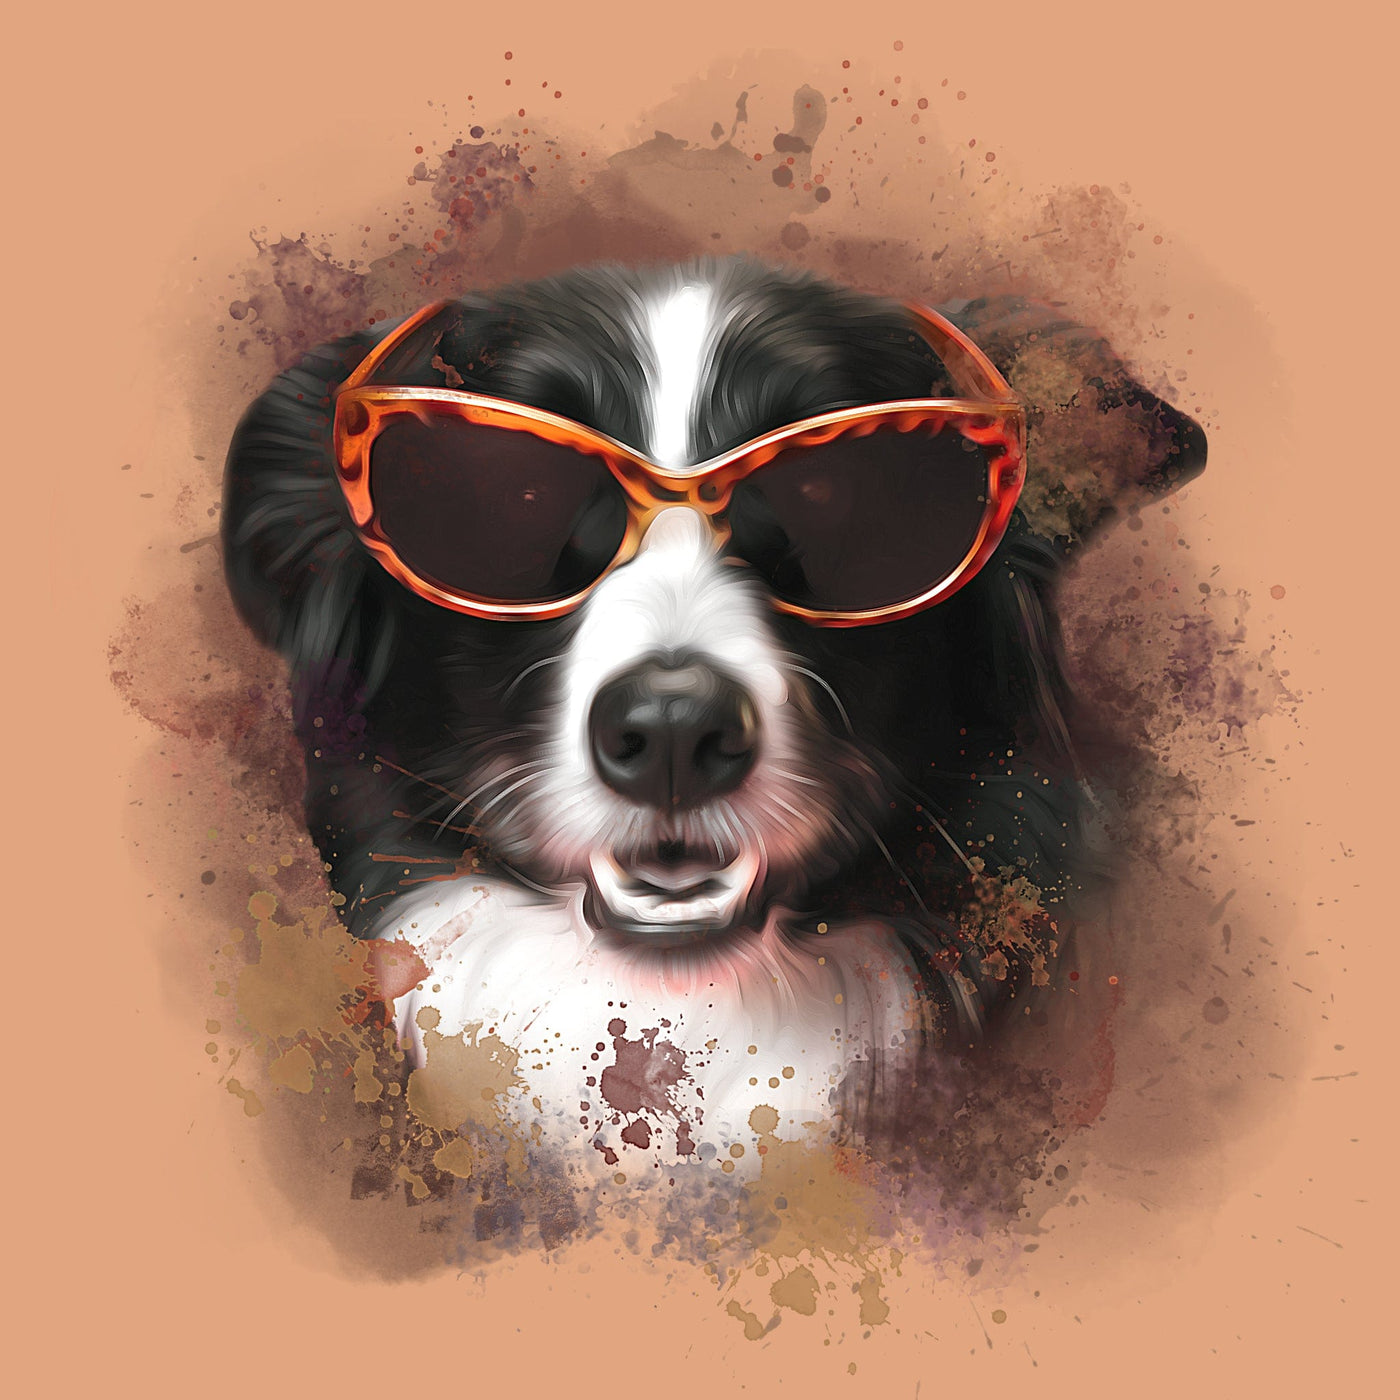 watercolor pet portrait of a cute dog with black and white fur, wearing eyeglasses